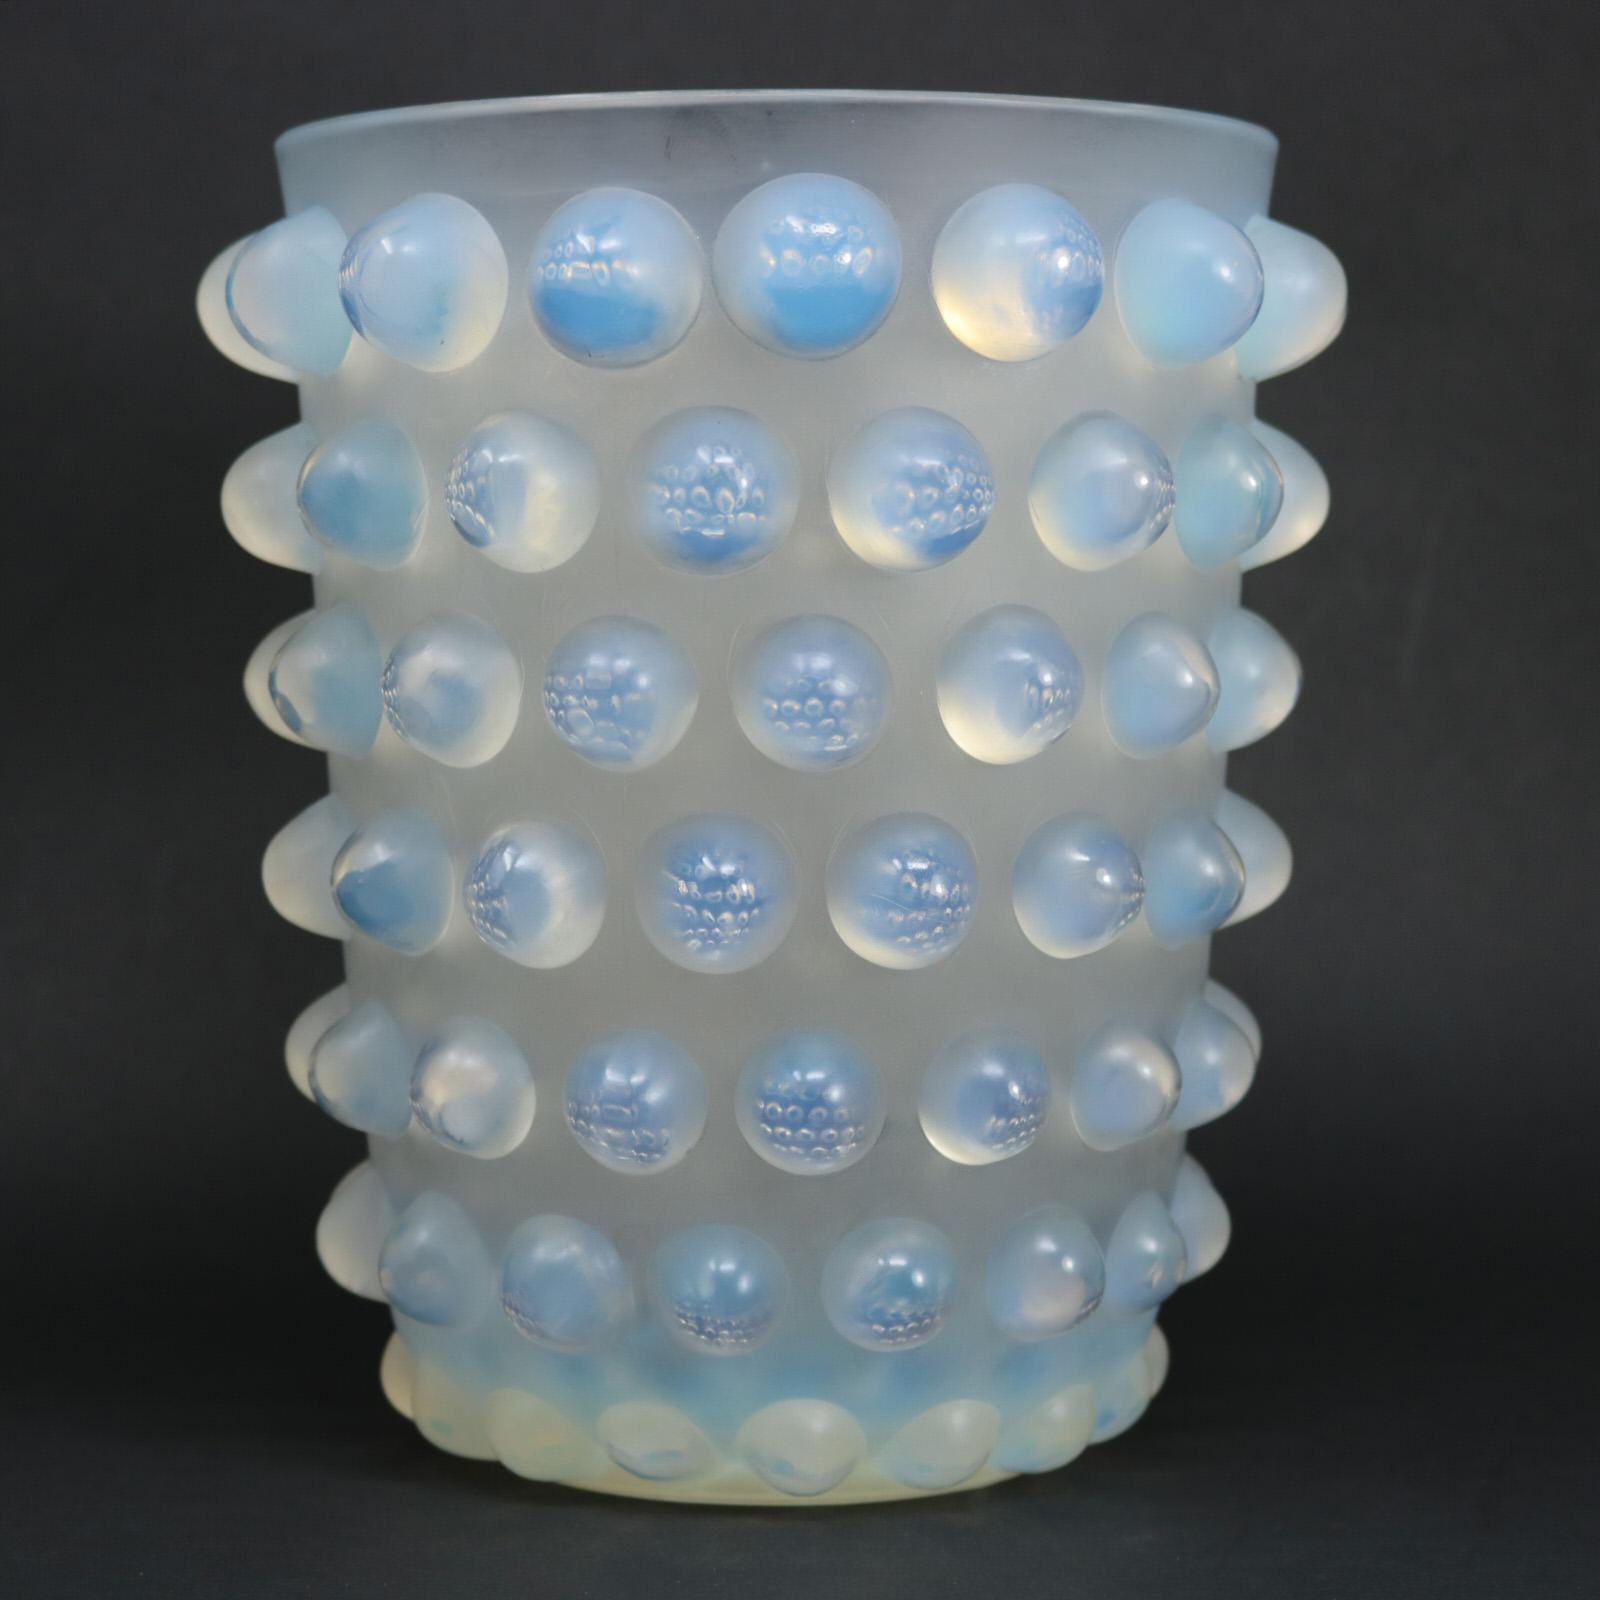 René Lalique opalescent glass Mossi vase. The vase is decorated around the outside with raised, hemispherical bubbles. When you look into the bubbles, they beautifully relect/refract bubbles from all around the vase. Stenciled makers mark, 'R.